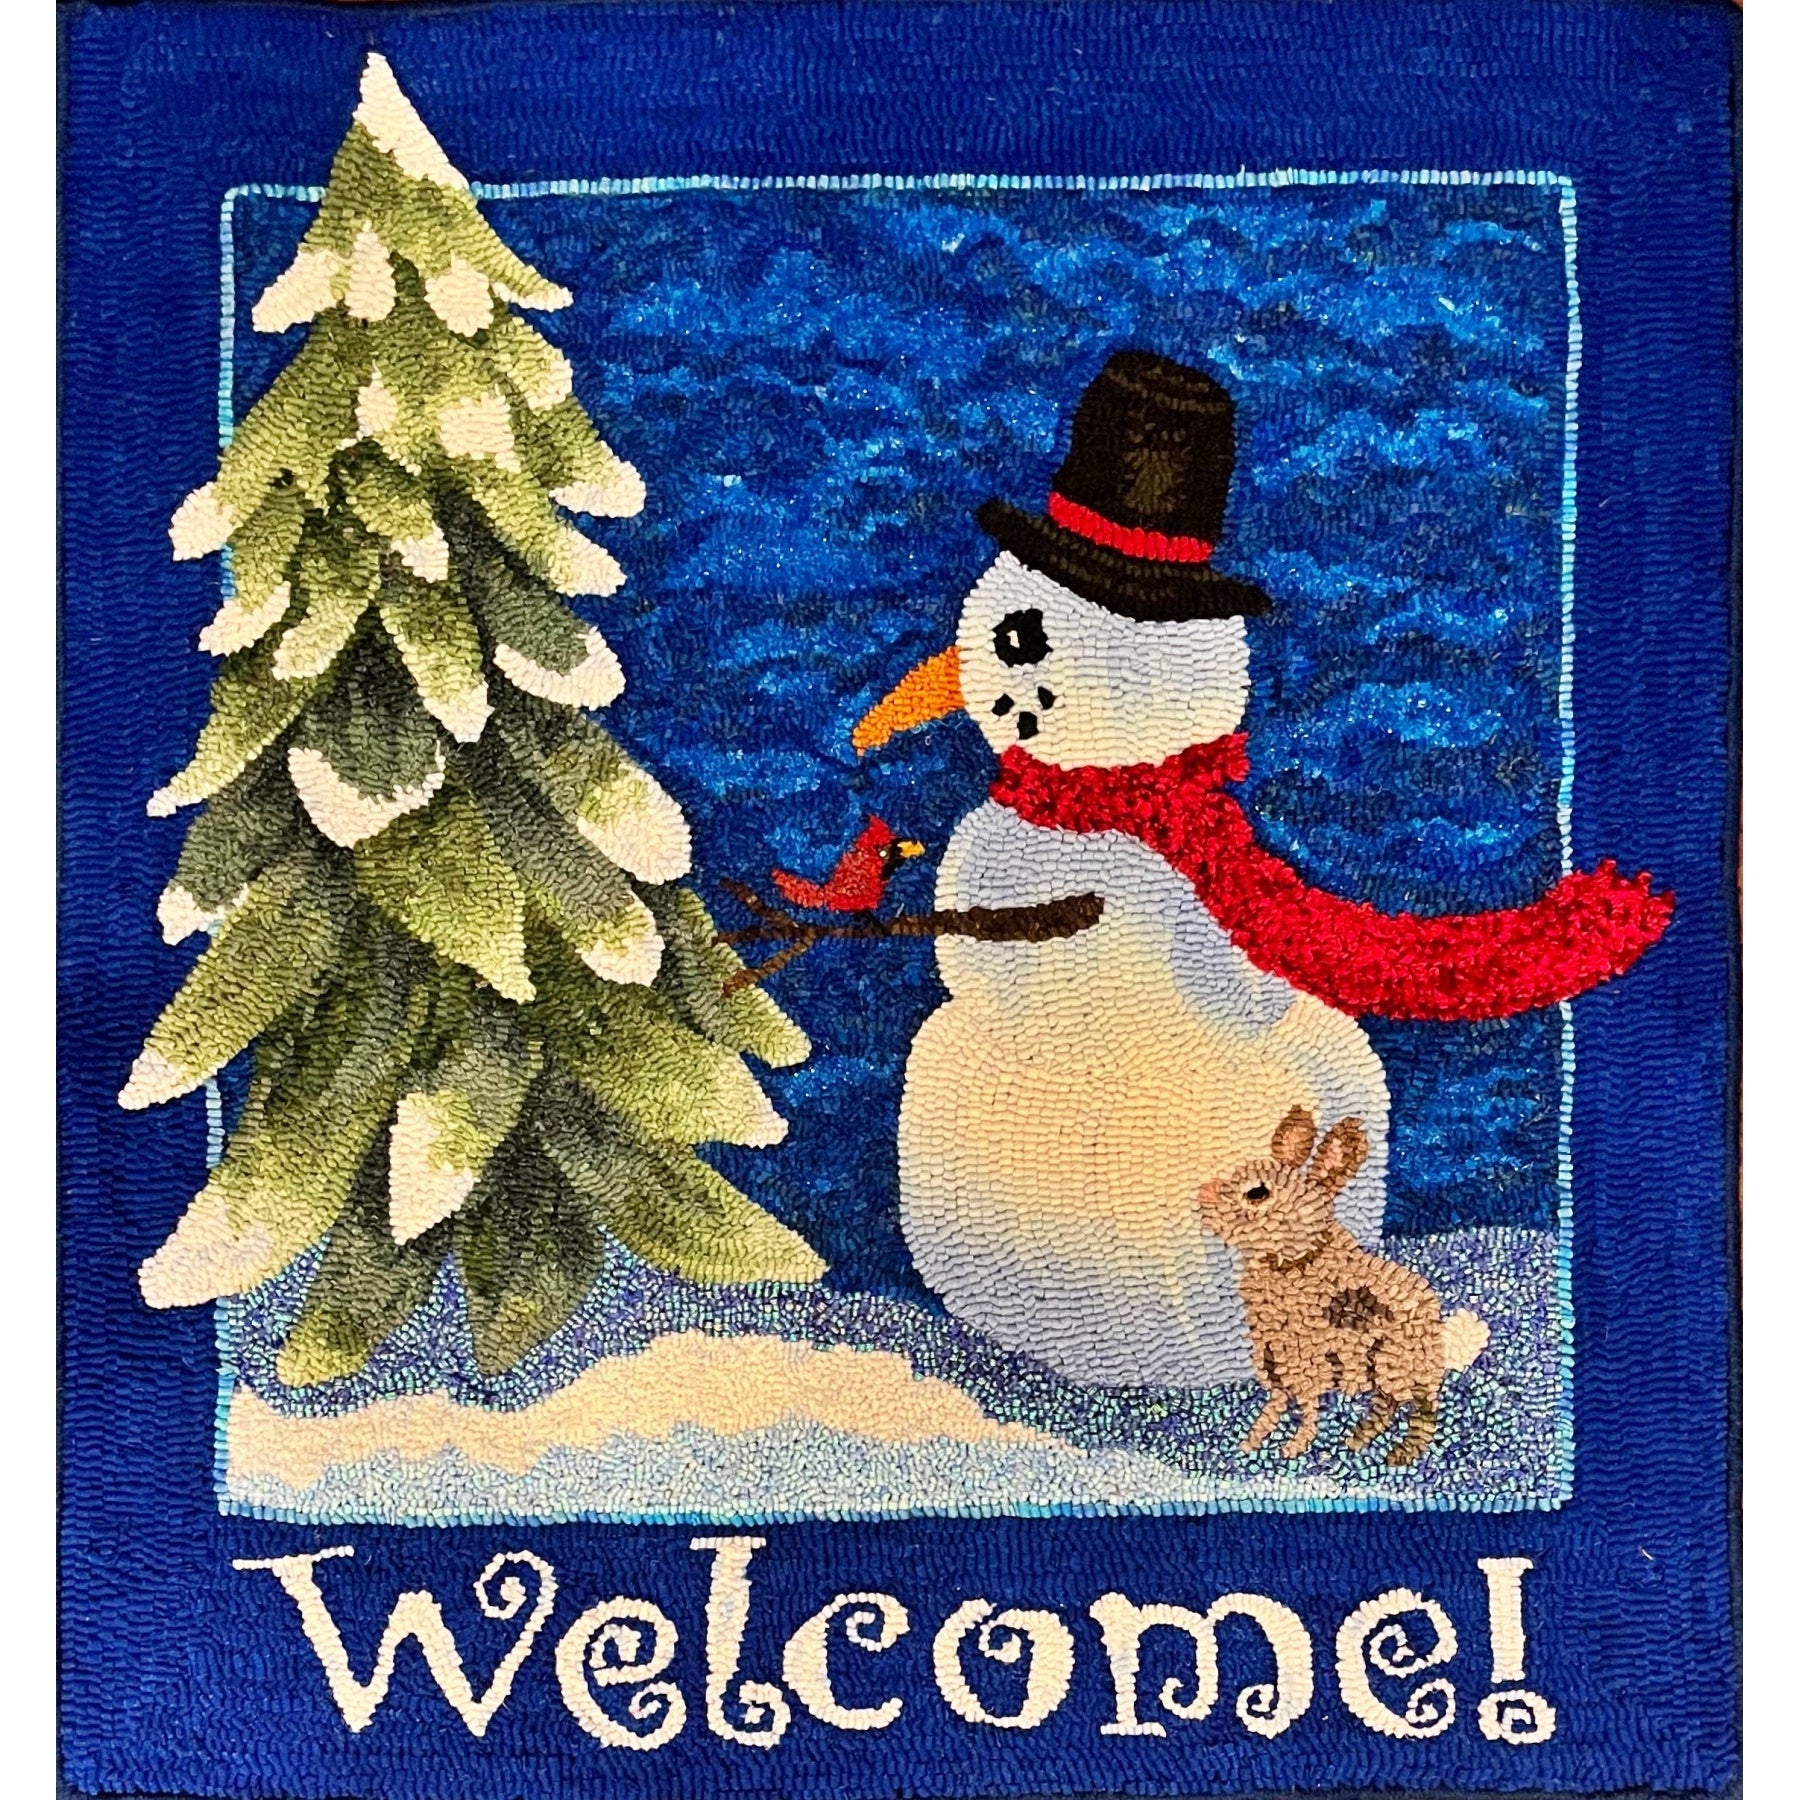 Snowman Welcome, rug hooked by Vivily Powers